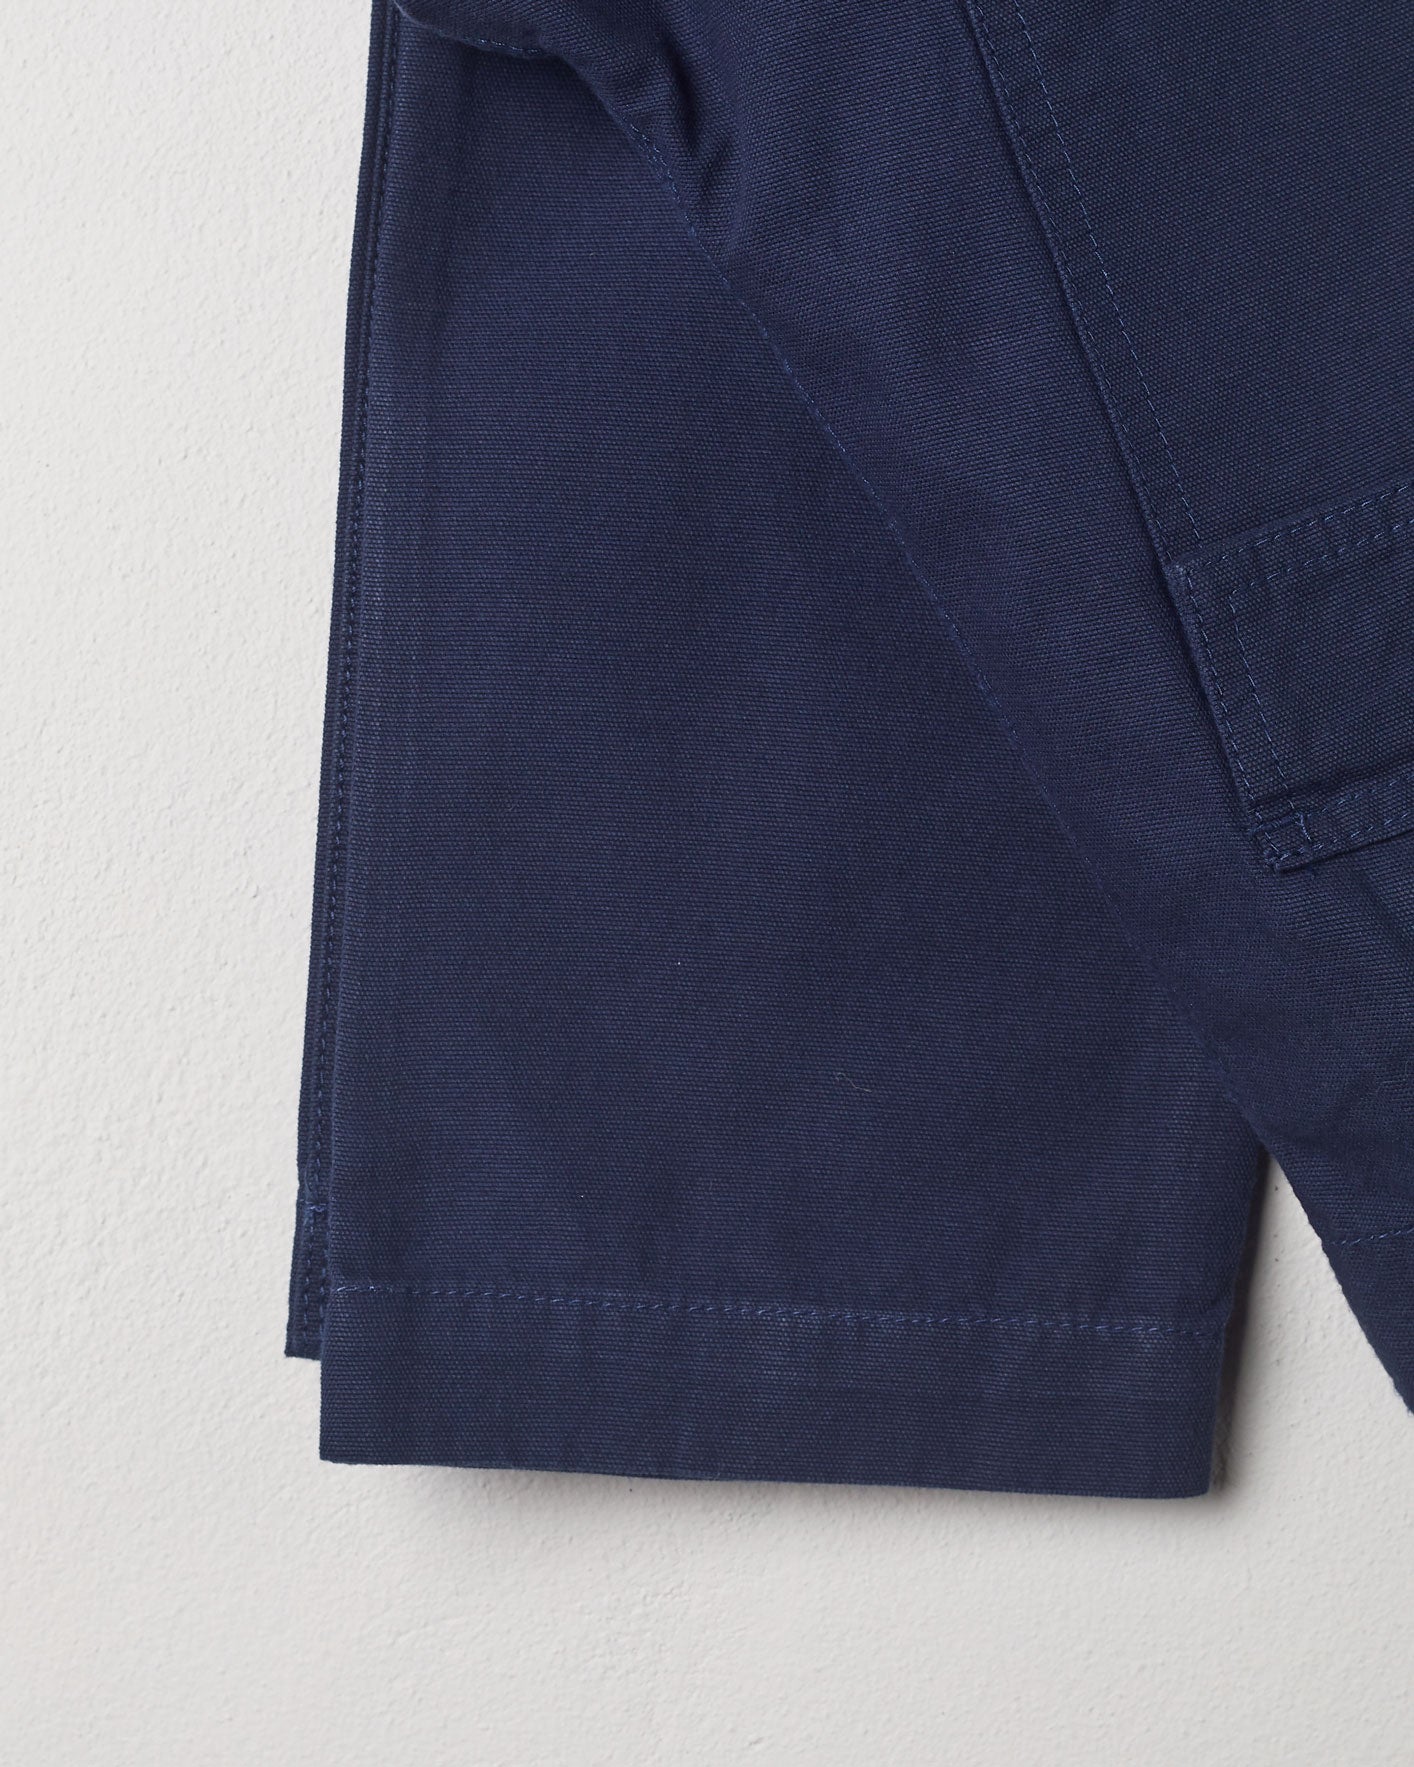 Close-up view of #5005 Uskees organic cotton workwear pants in navy showing triple stitching.